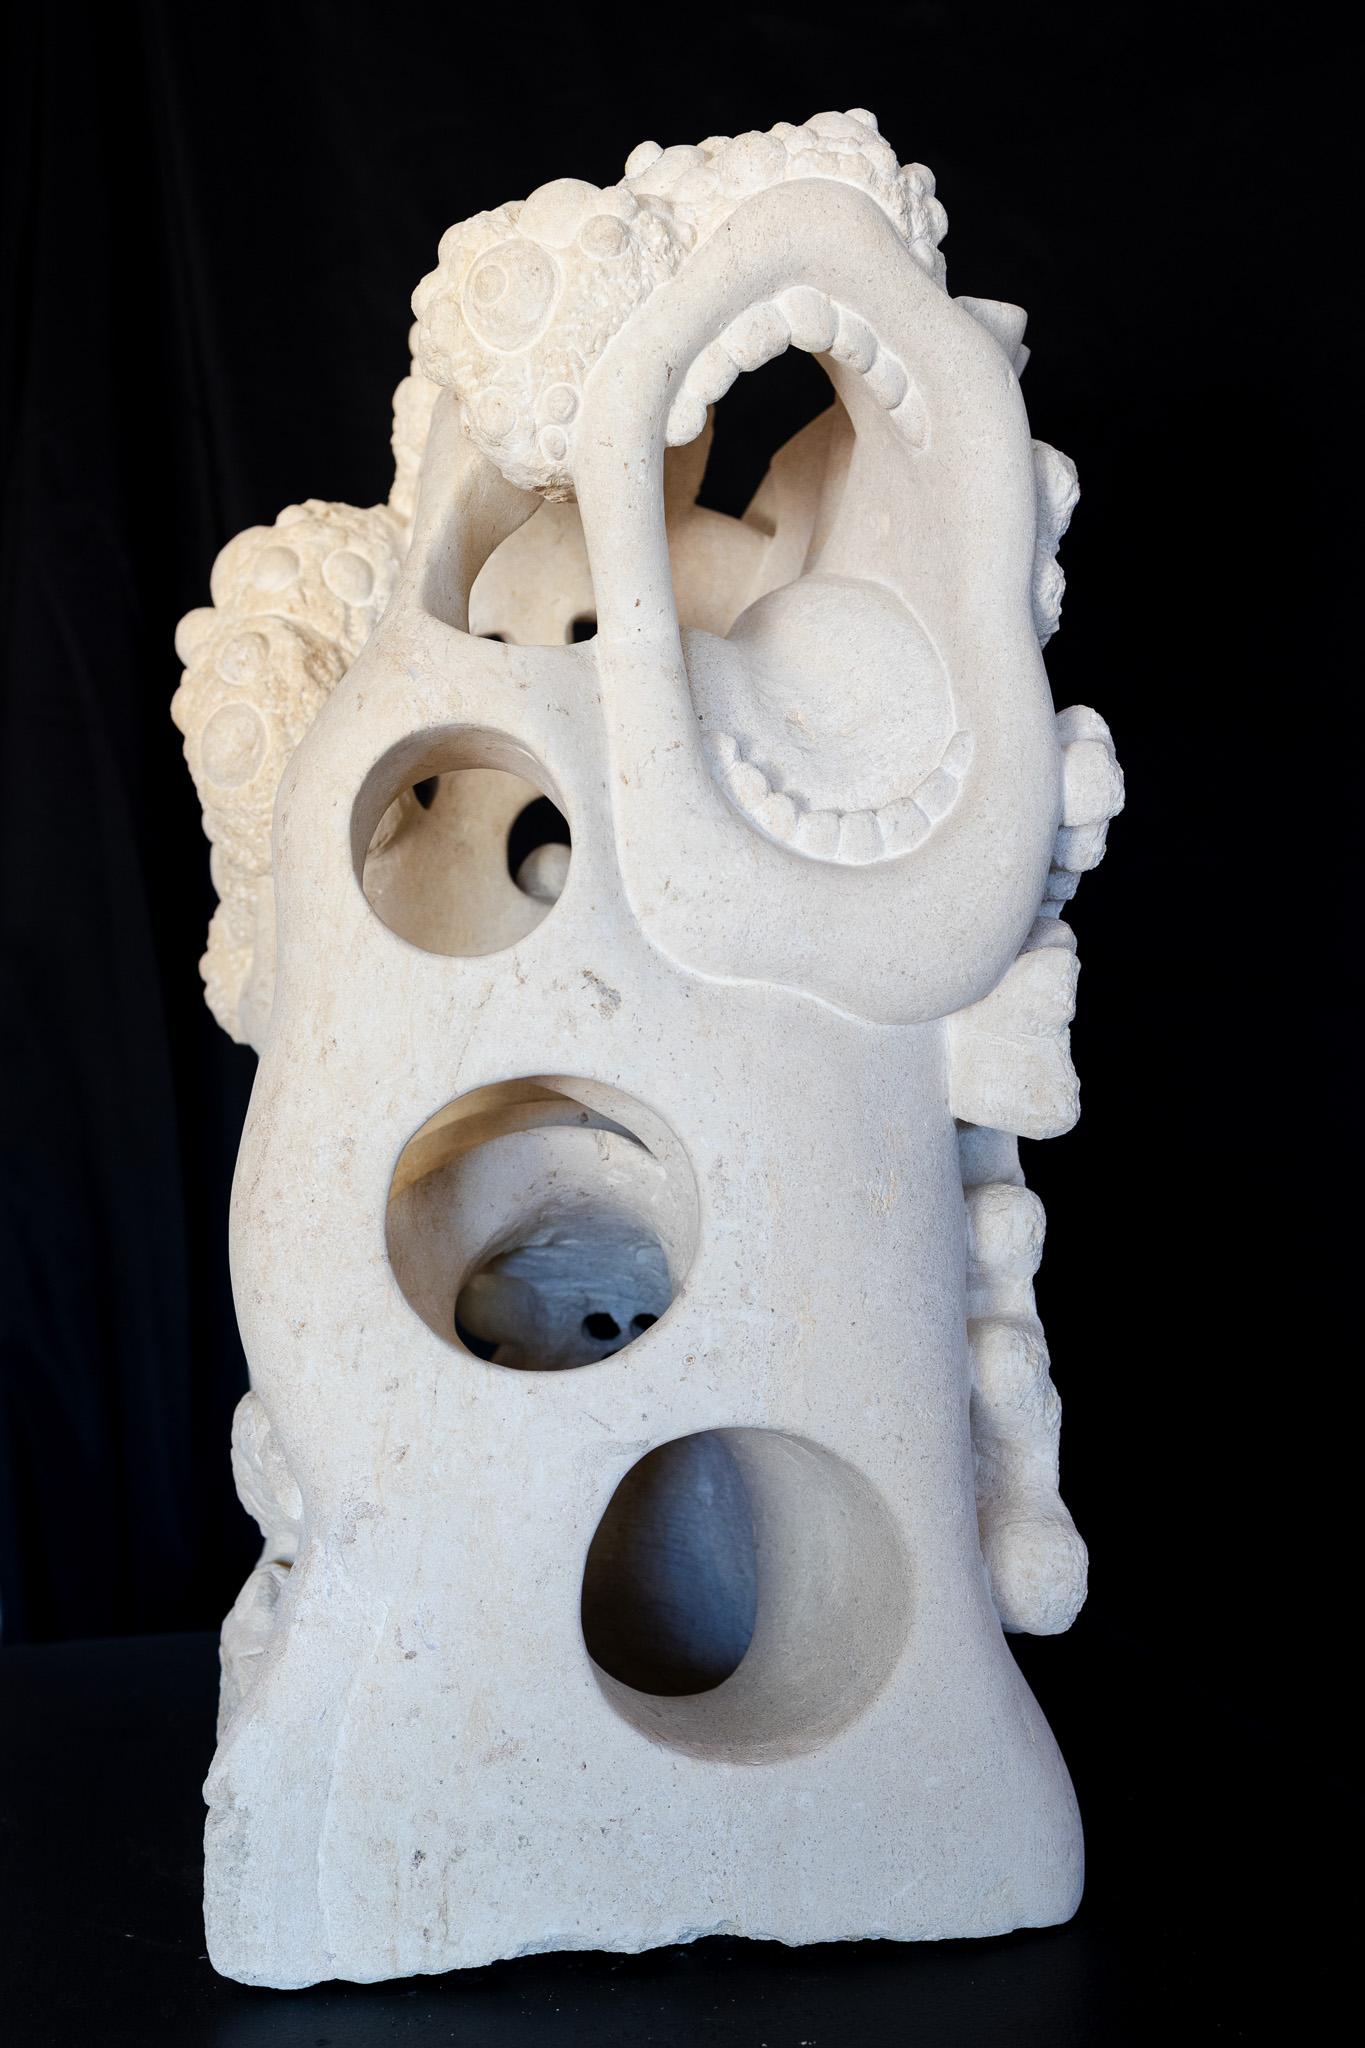 Bob Ragan Figurative Sculpture - "Night at the Opera" Psychedelic Sculpture White Carves Stone Mouth Singing Fun